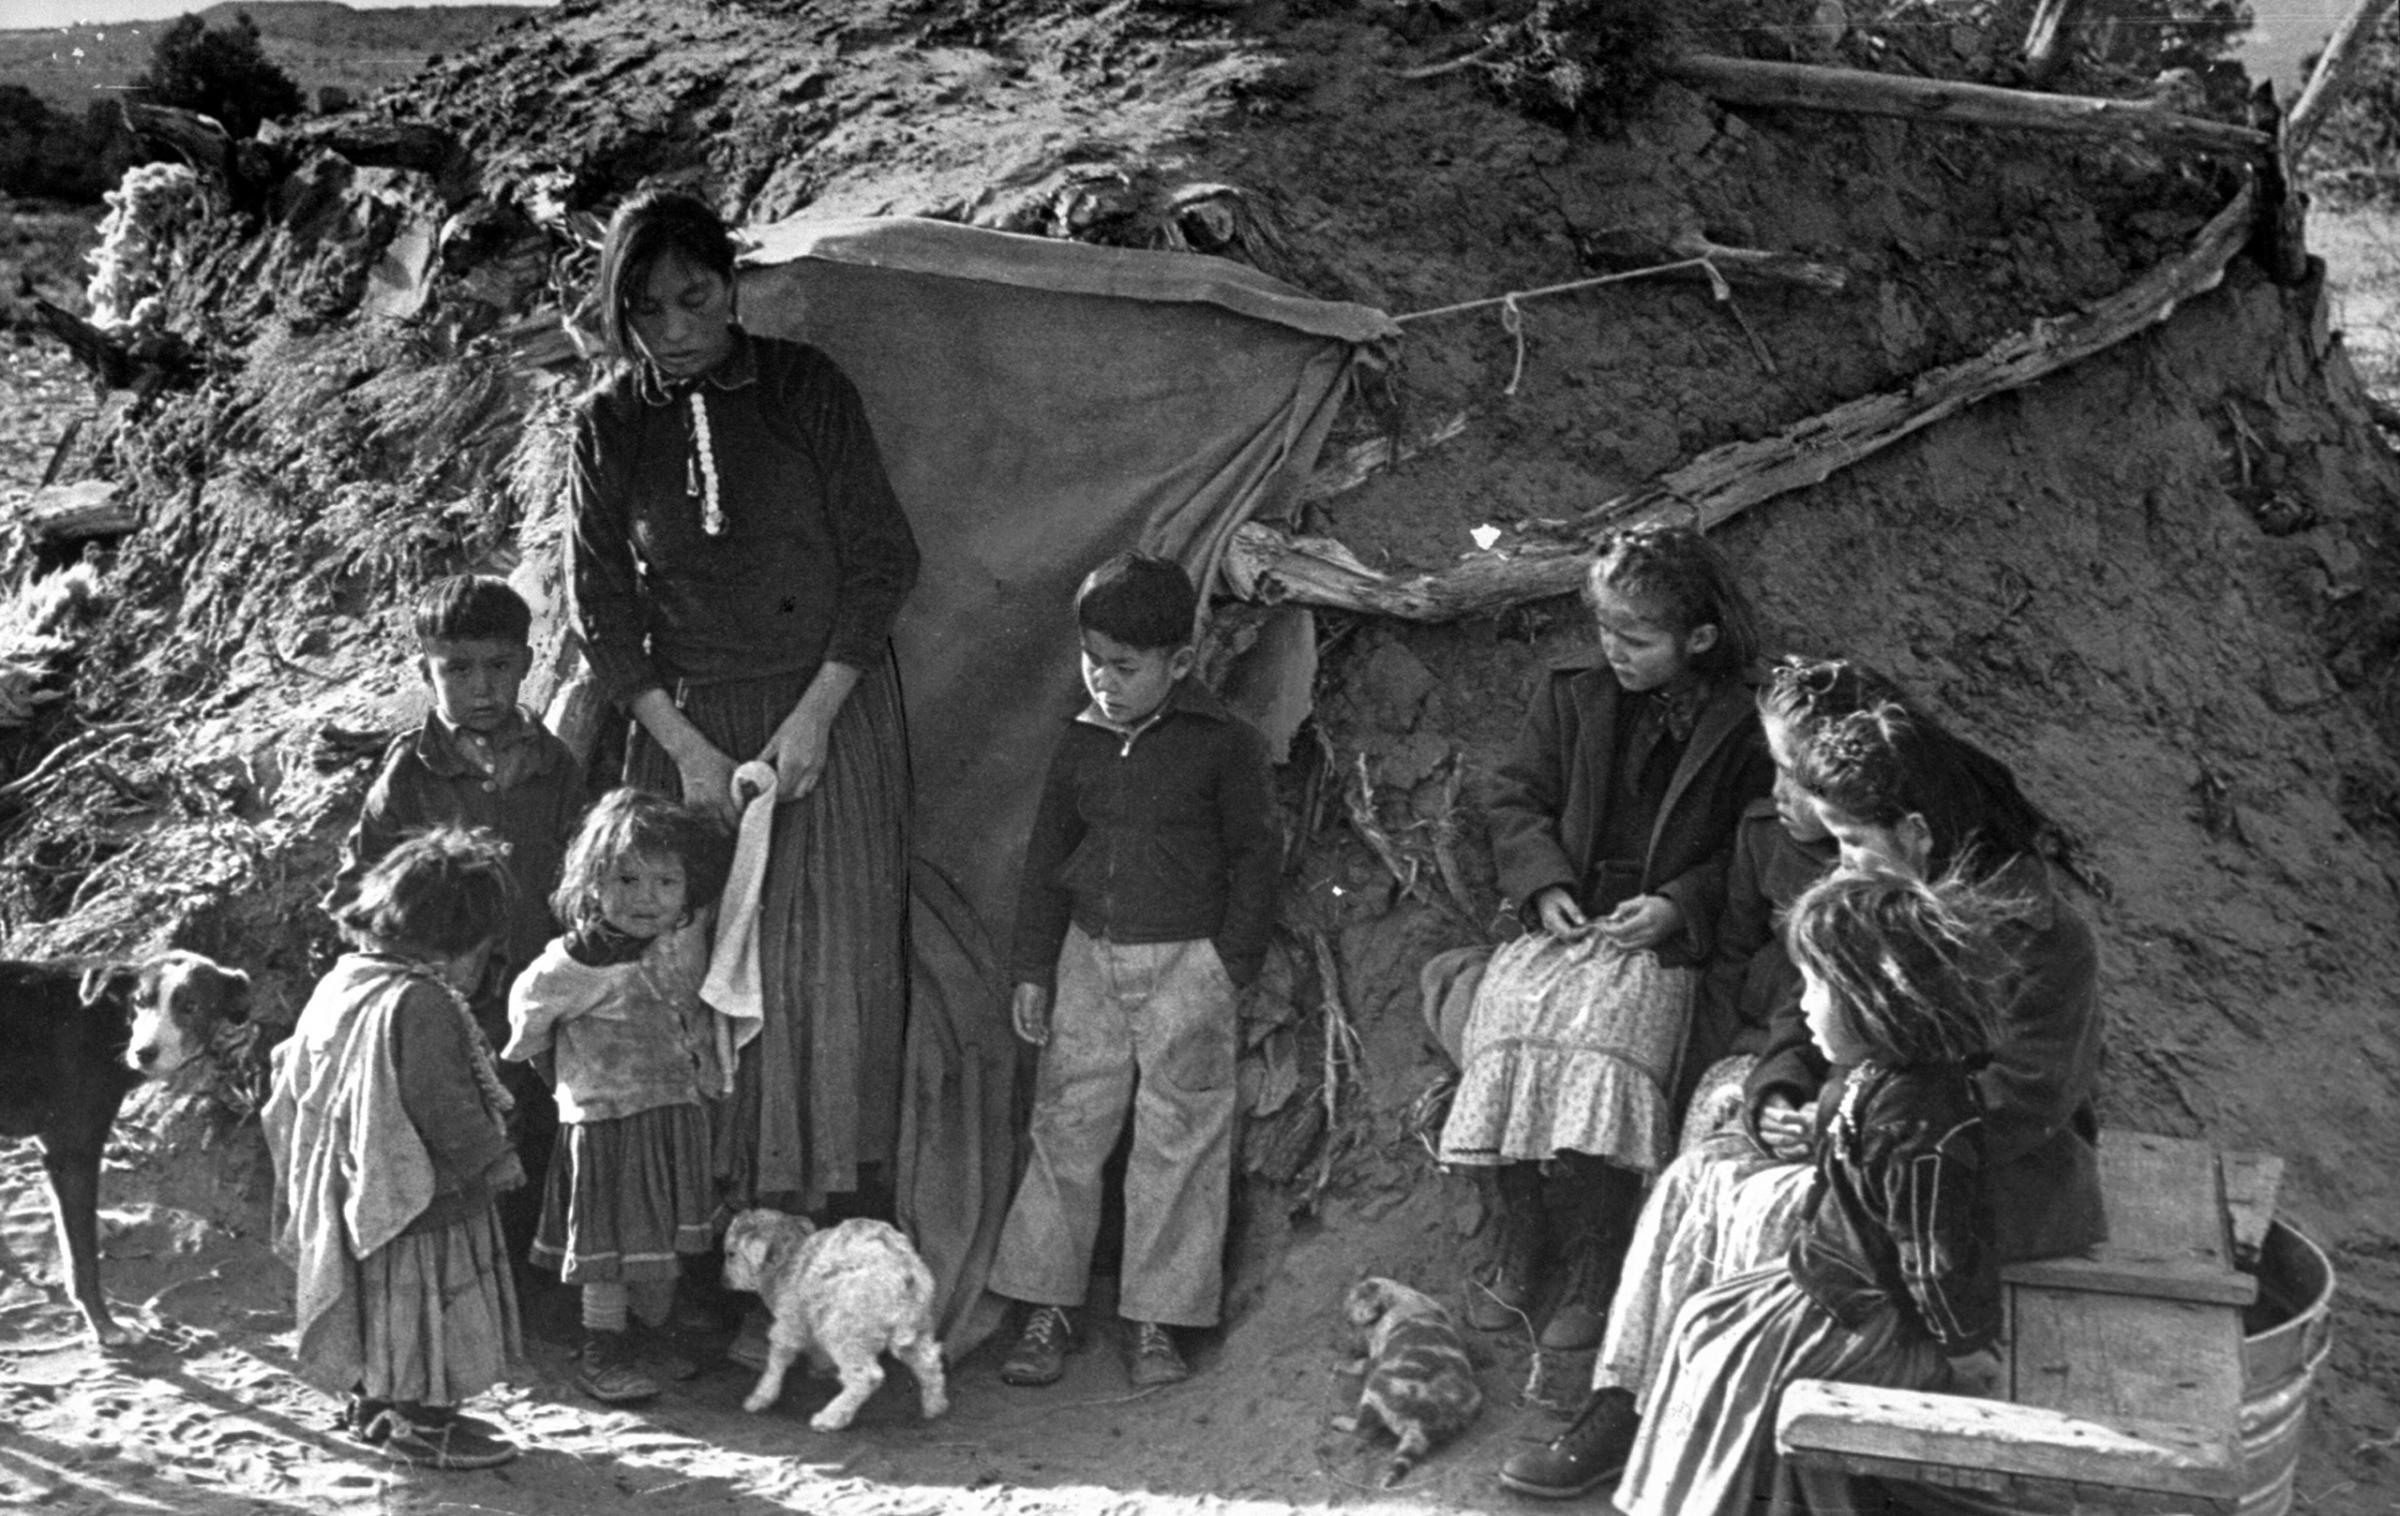 A Navajo family living on a reservation.